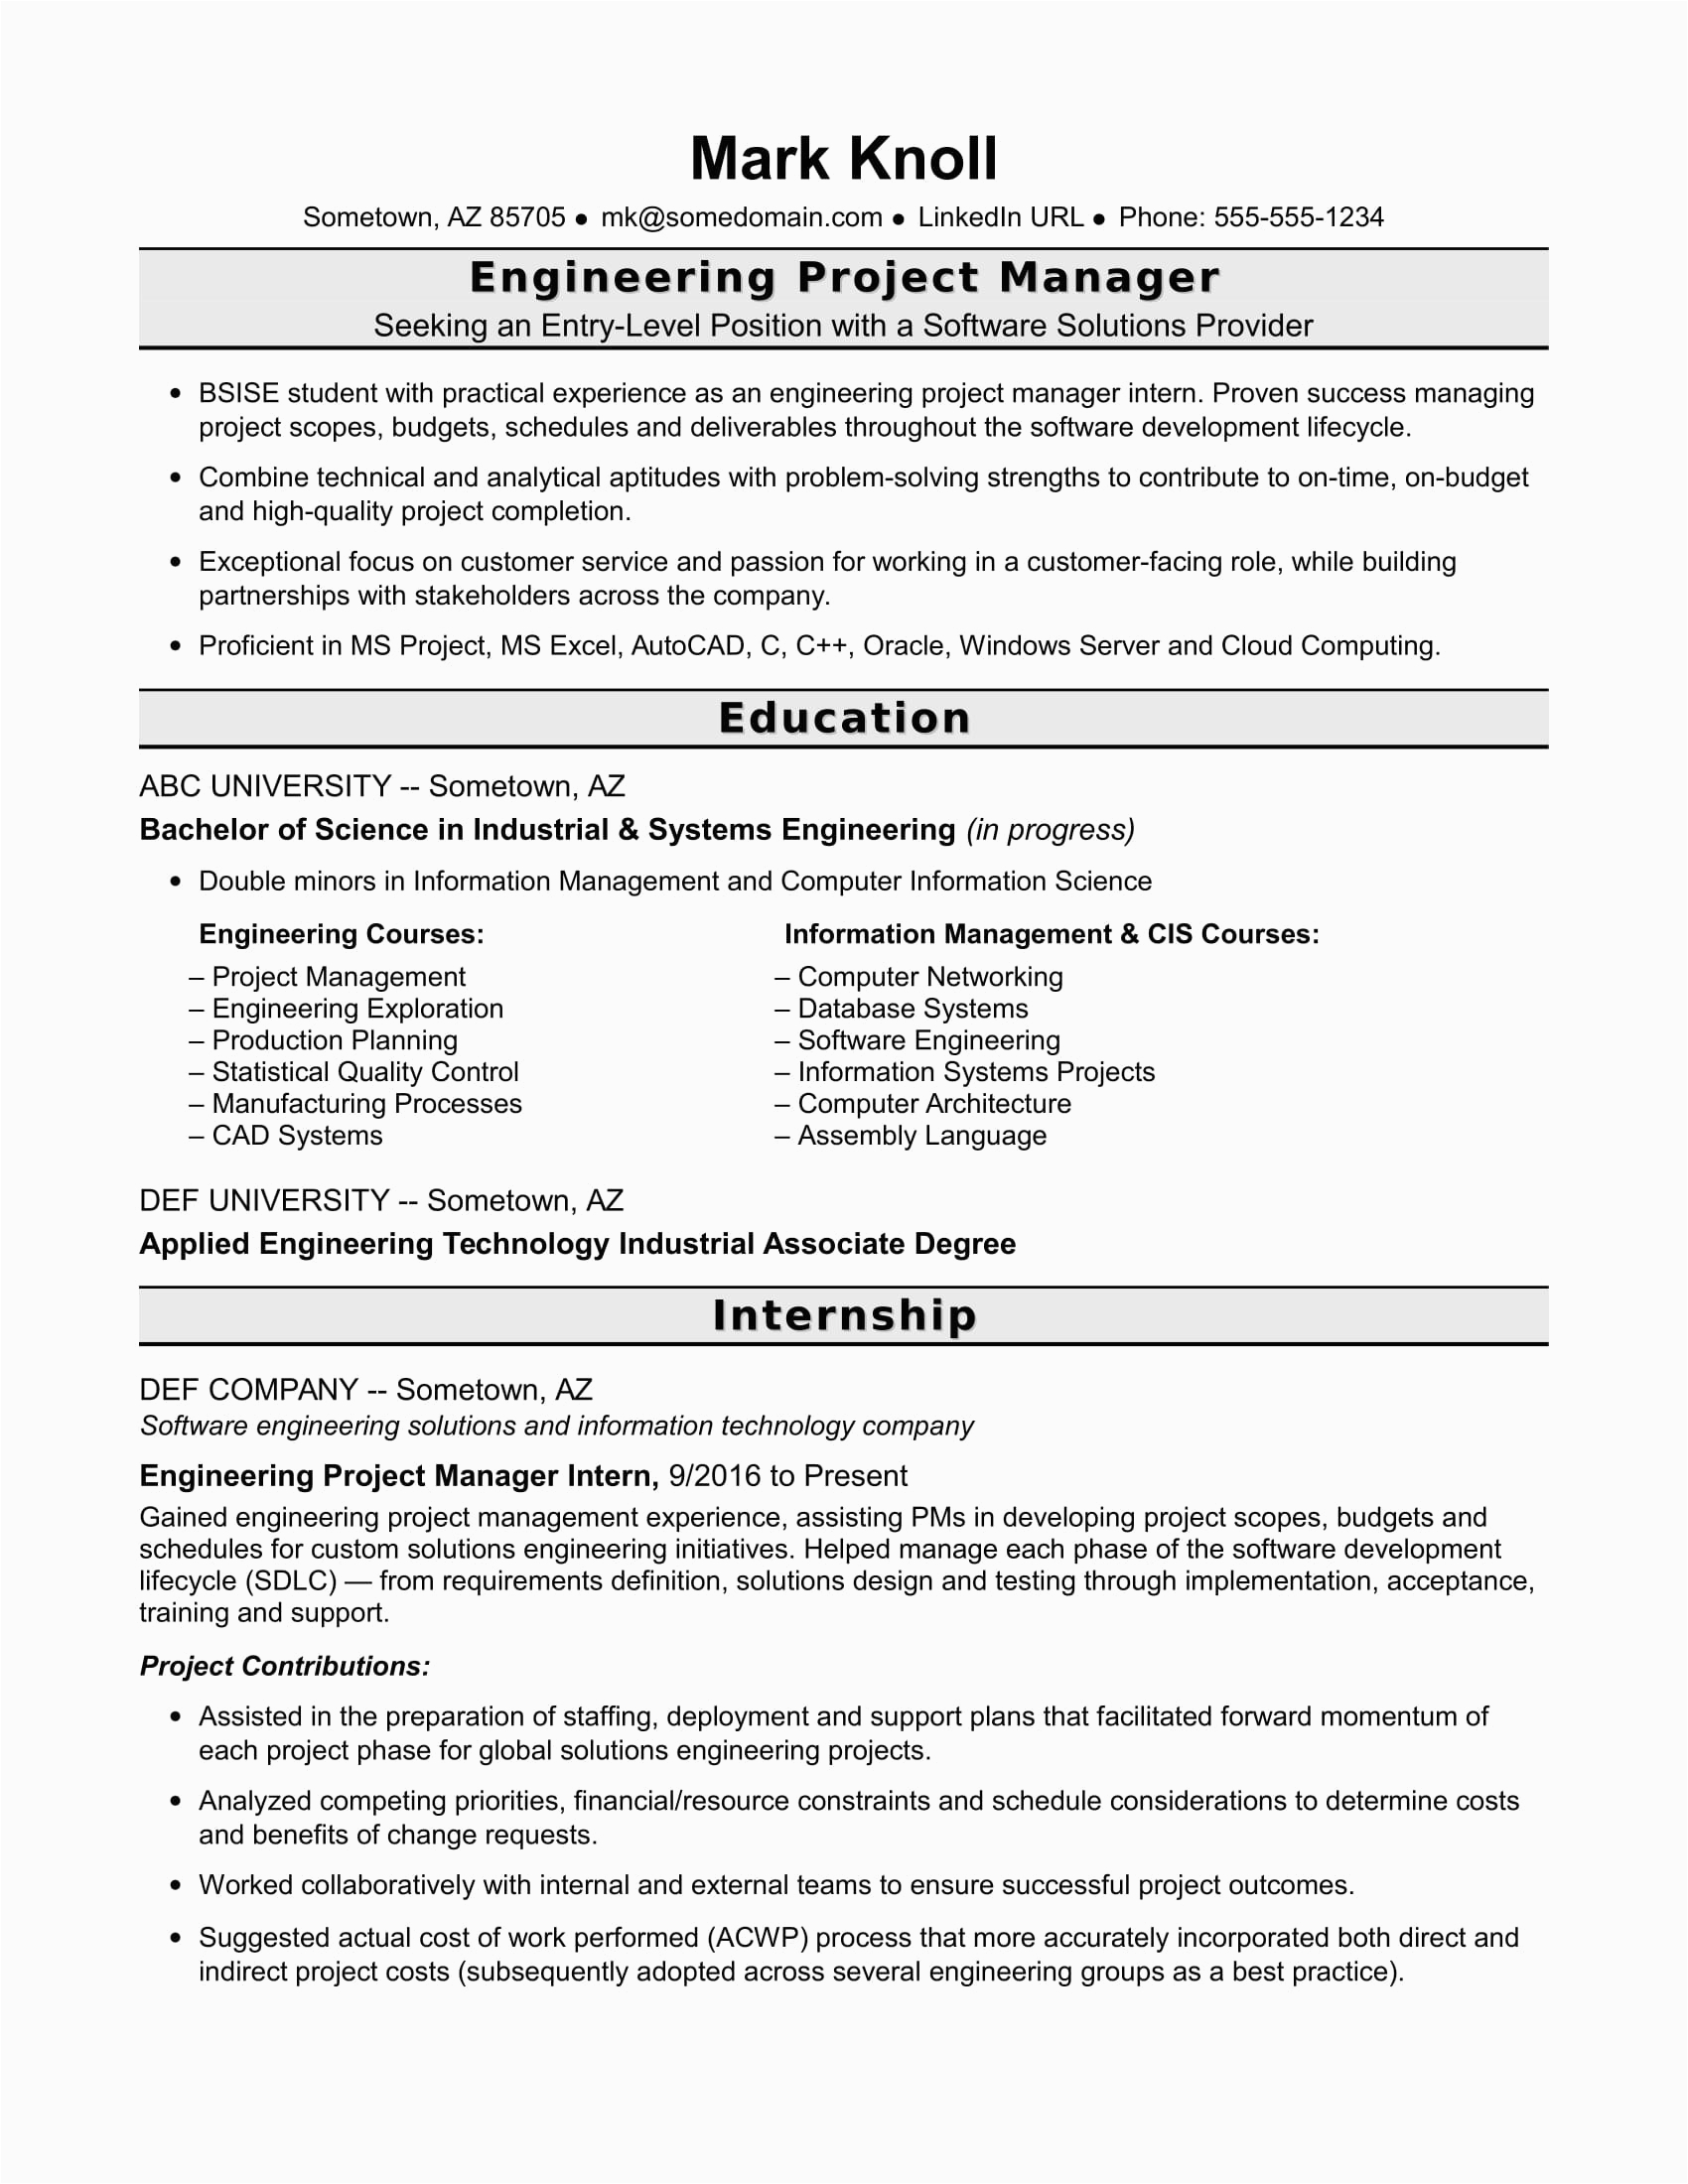 Sample Of Entry Level Engineering Resume Entry Level Project Manager Resume for Engineers